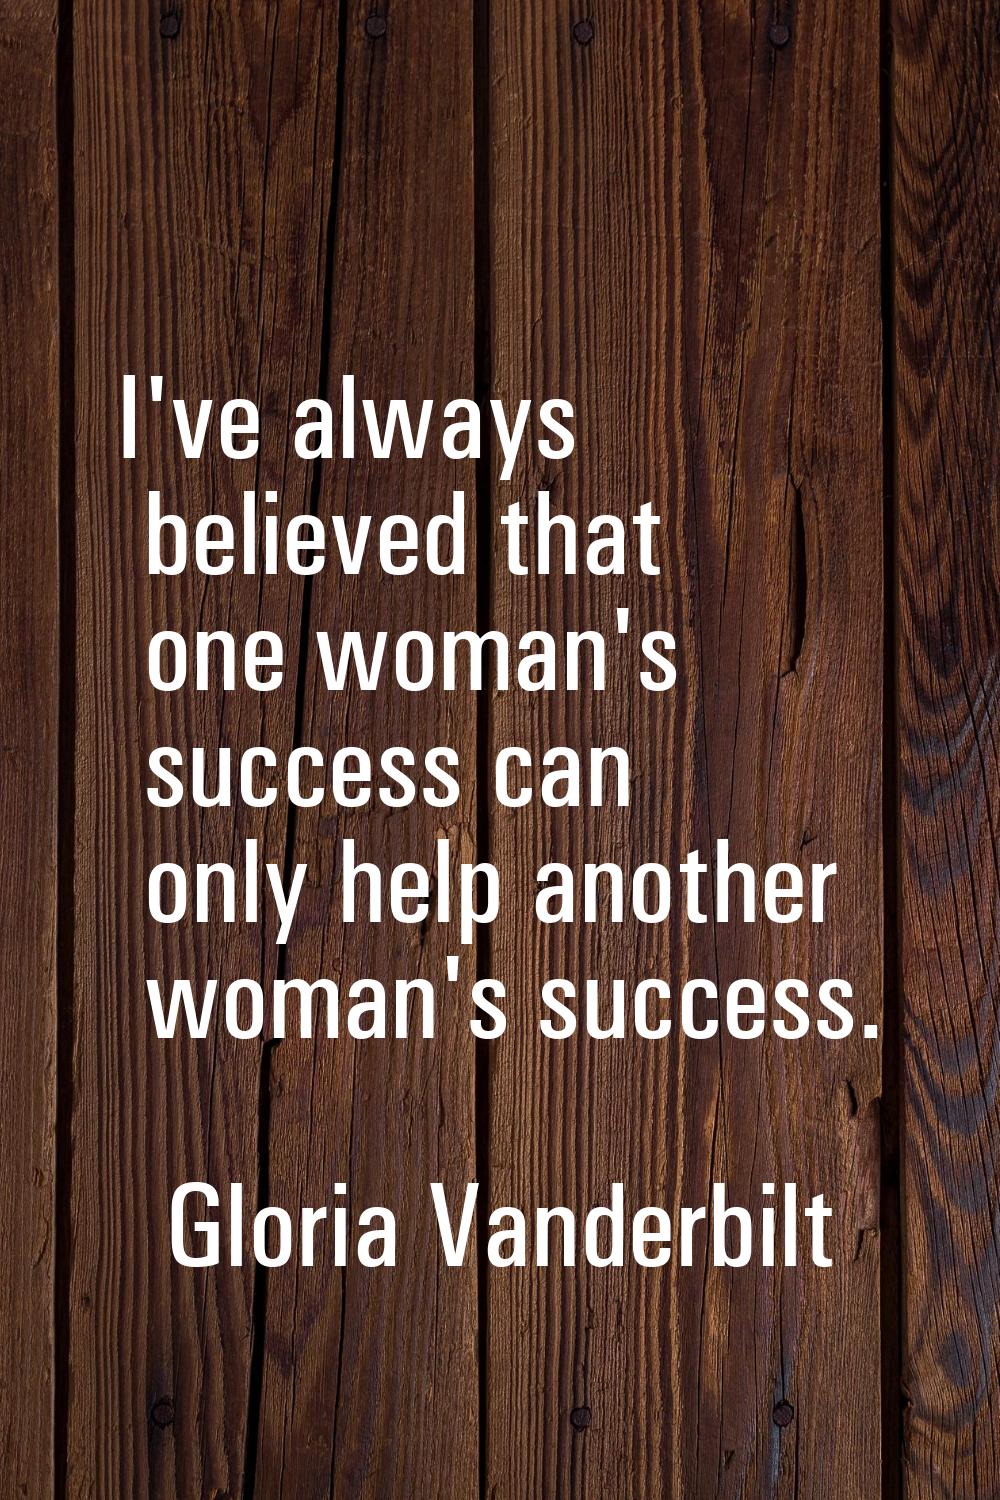 I've always believed that one woman's success can only help another woman's success.